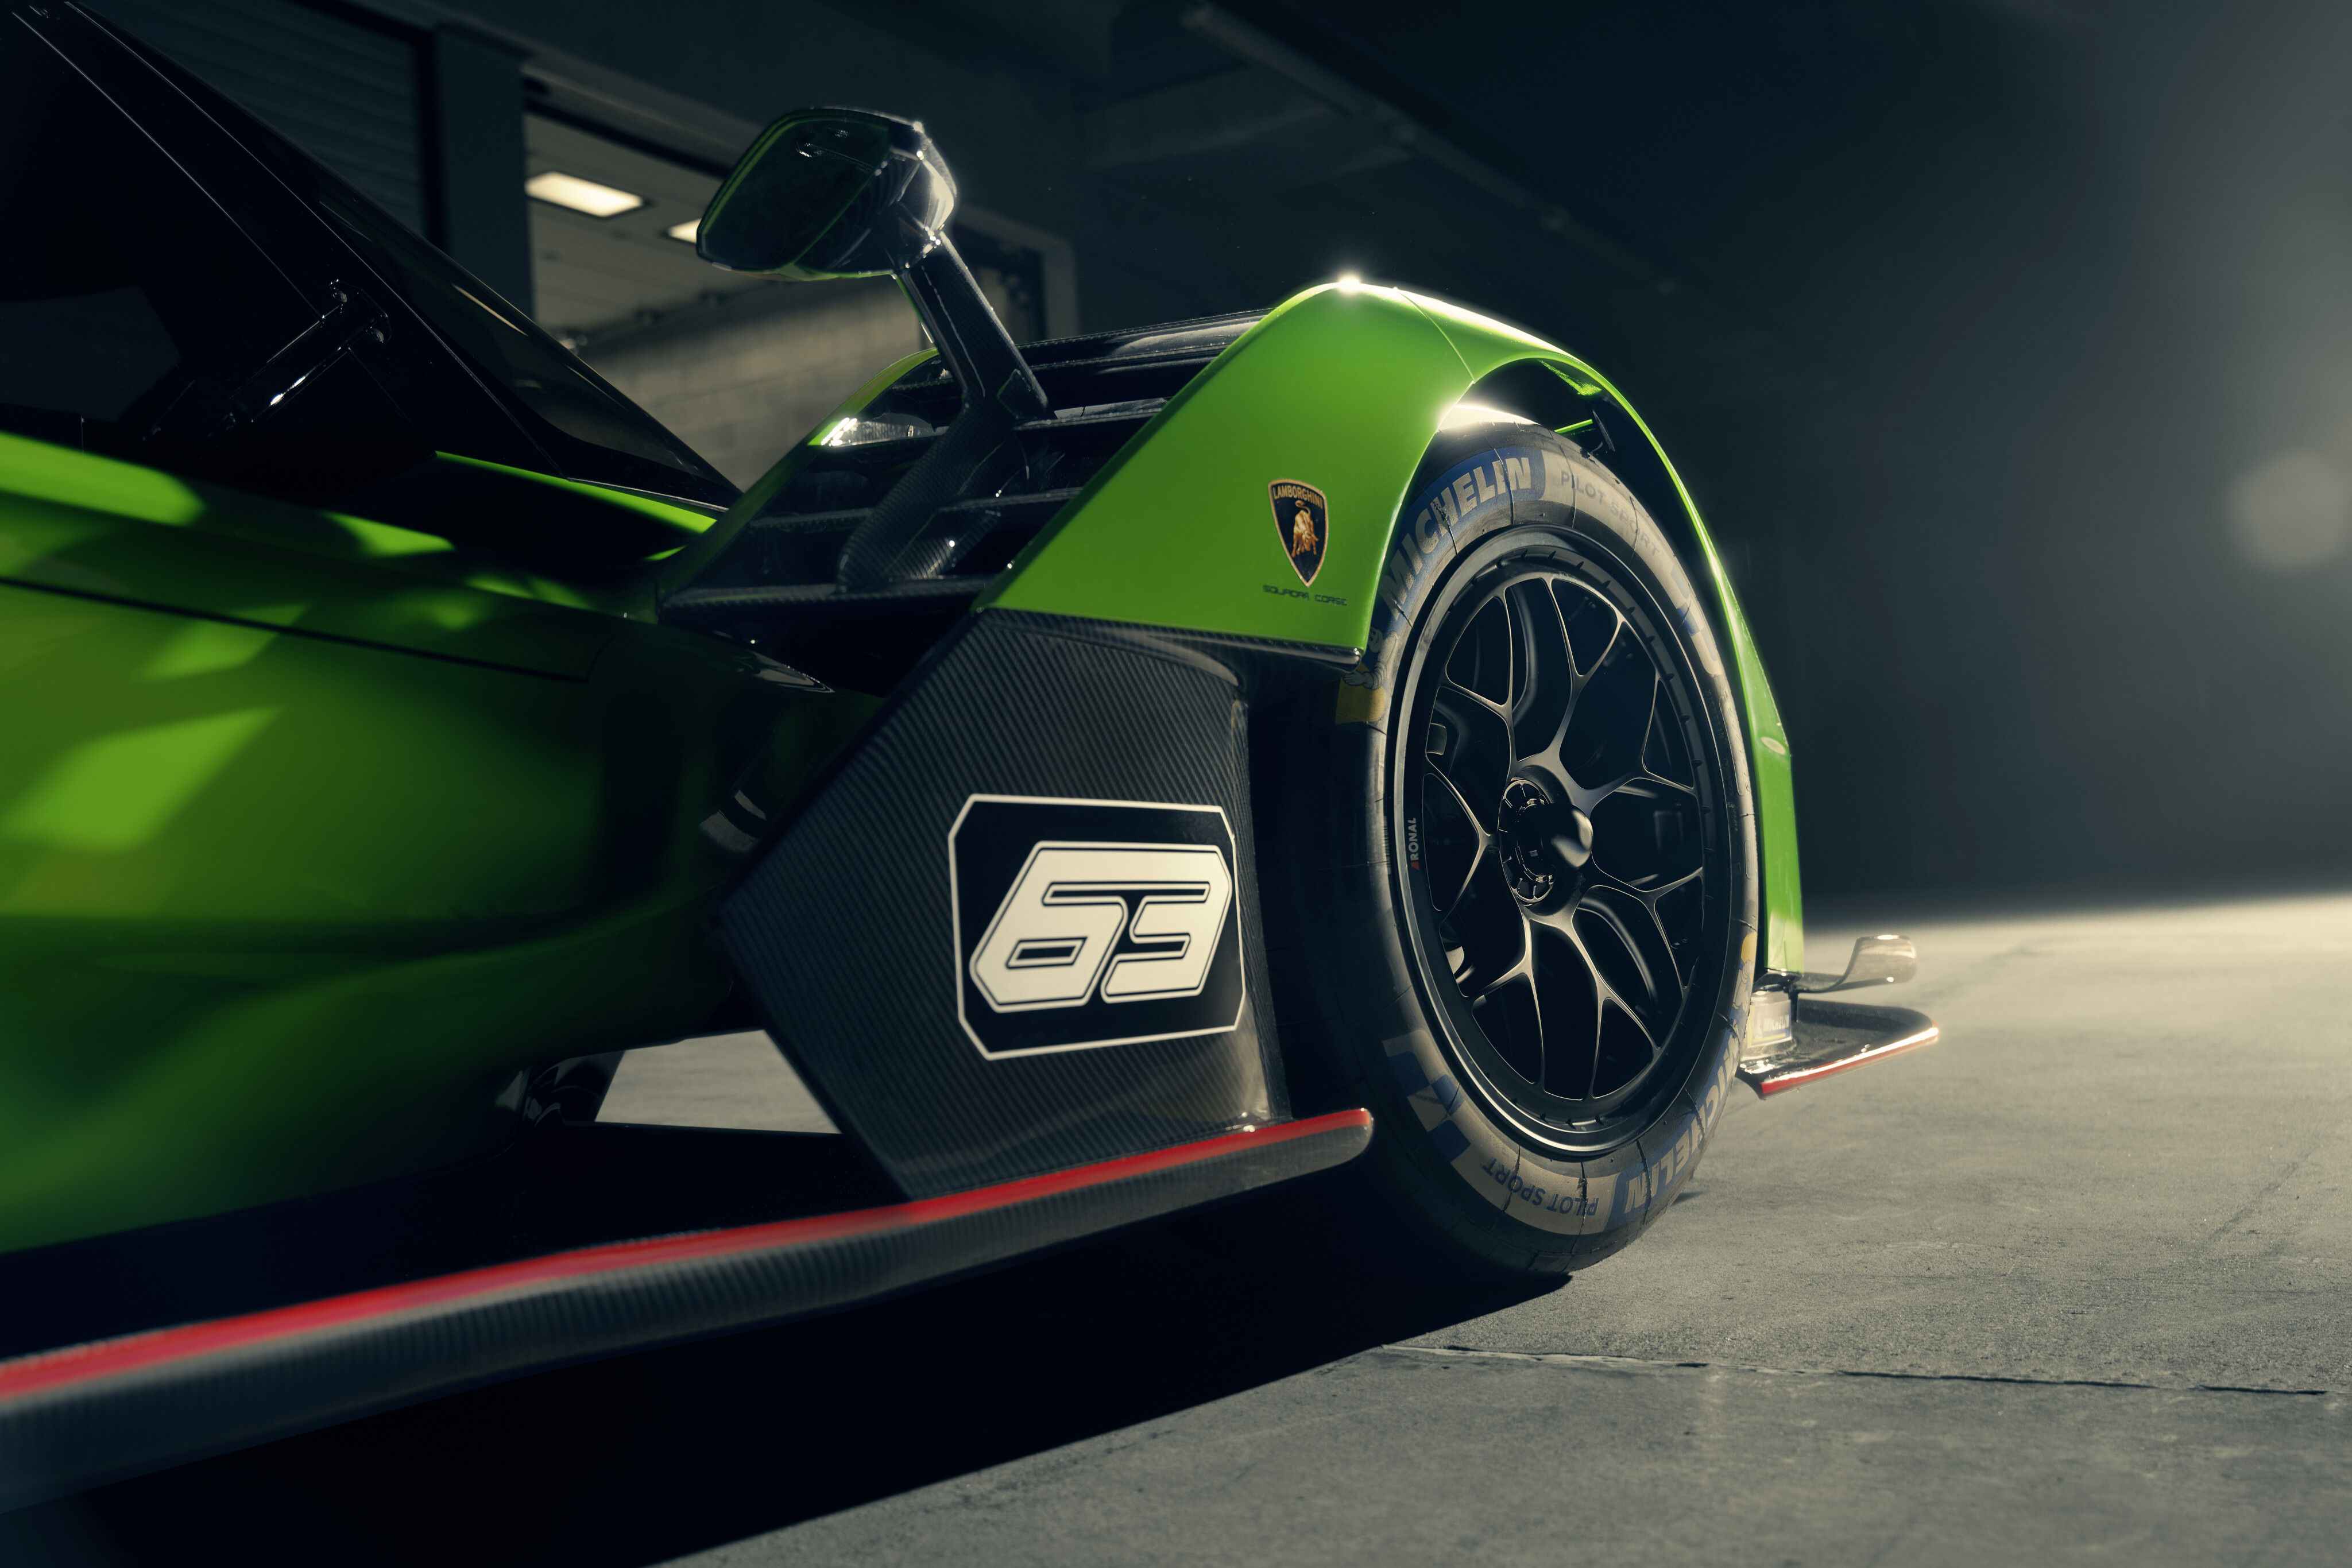 joins the Le Mans hypercar crowd with the SC63